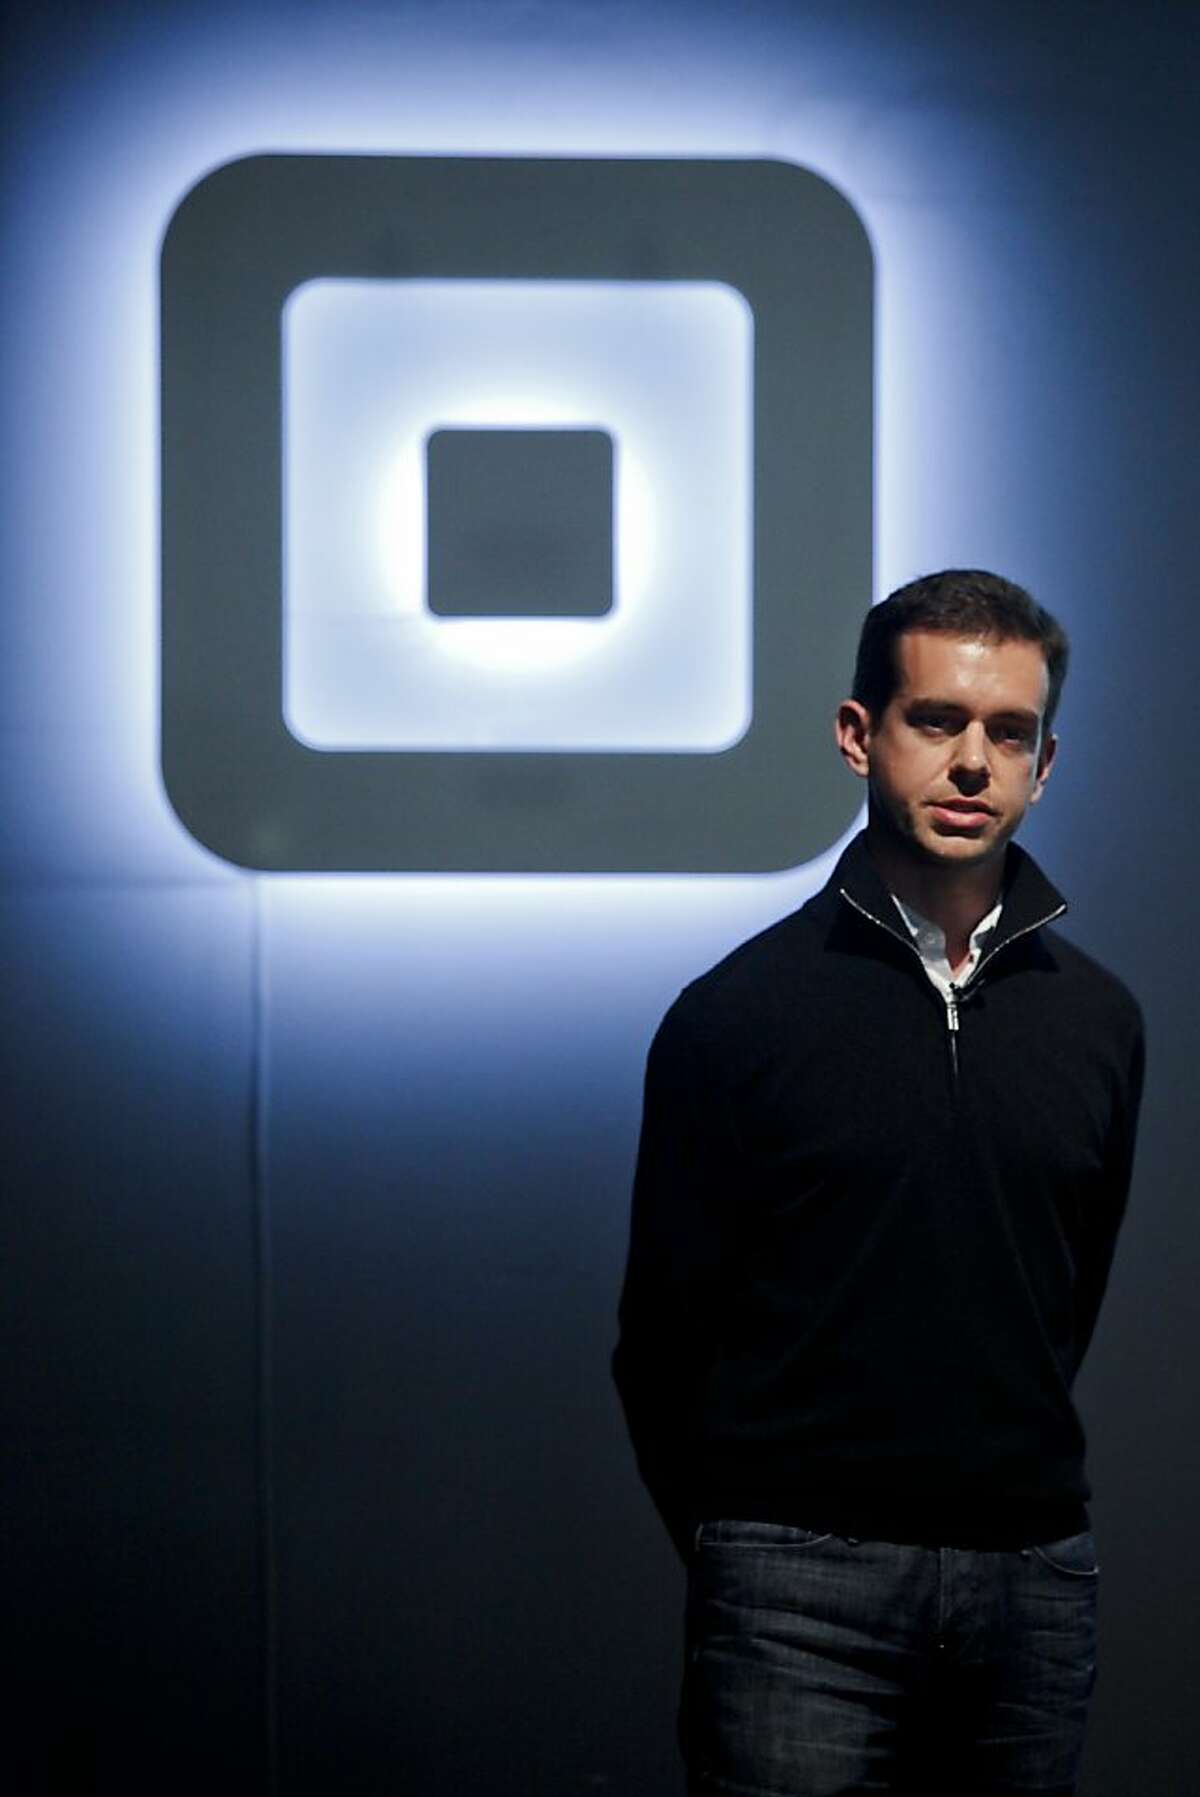 Jack Dorsey of Square introduces two new products, Square Wallet and Square Register, at a product unveiling at the Square Headquarters on Monday, May 23, 2011 in San Francisco, Calif.